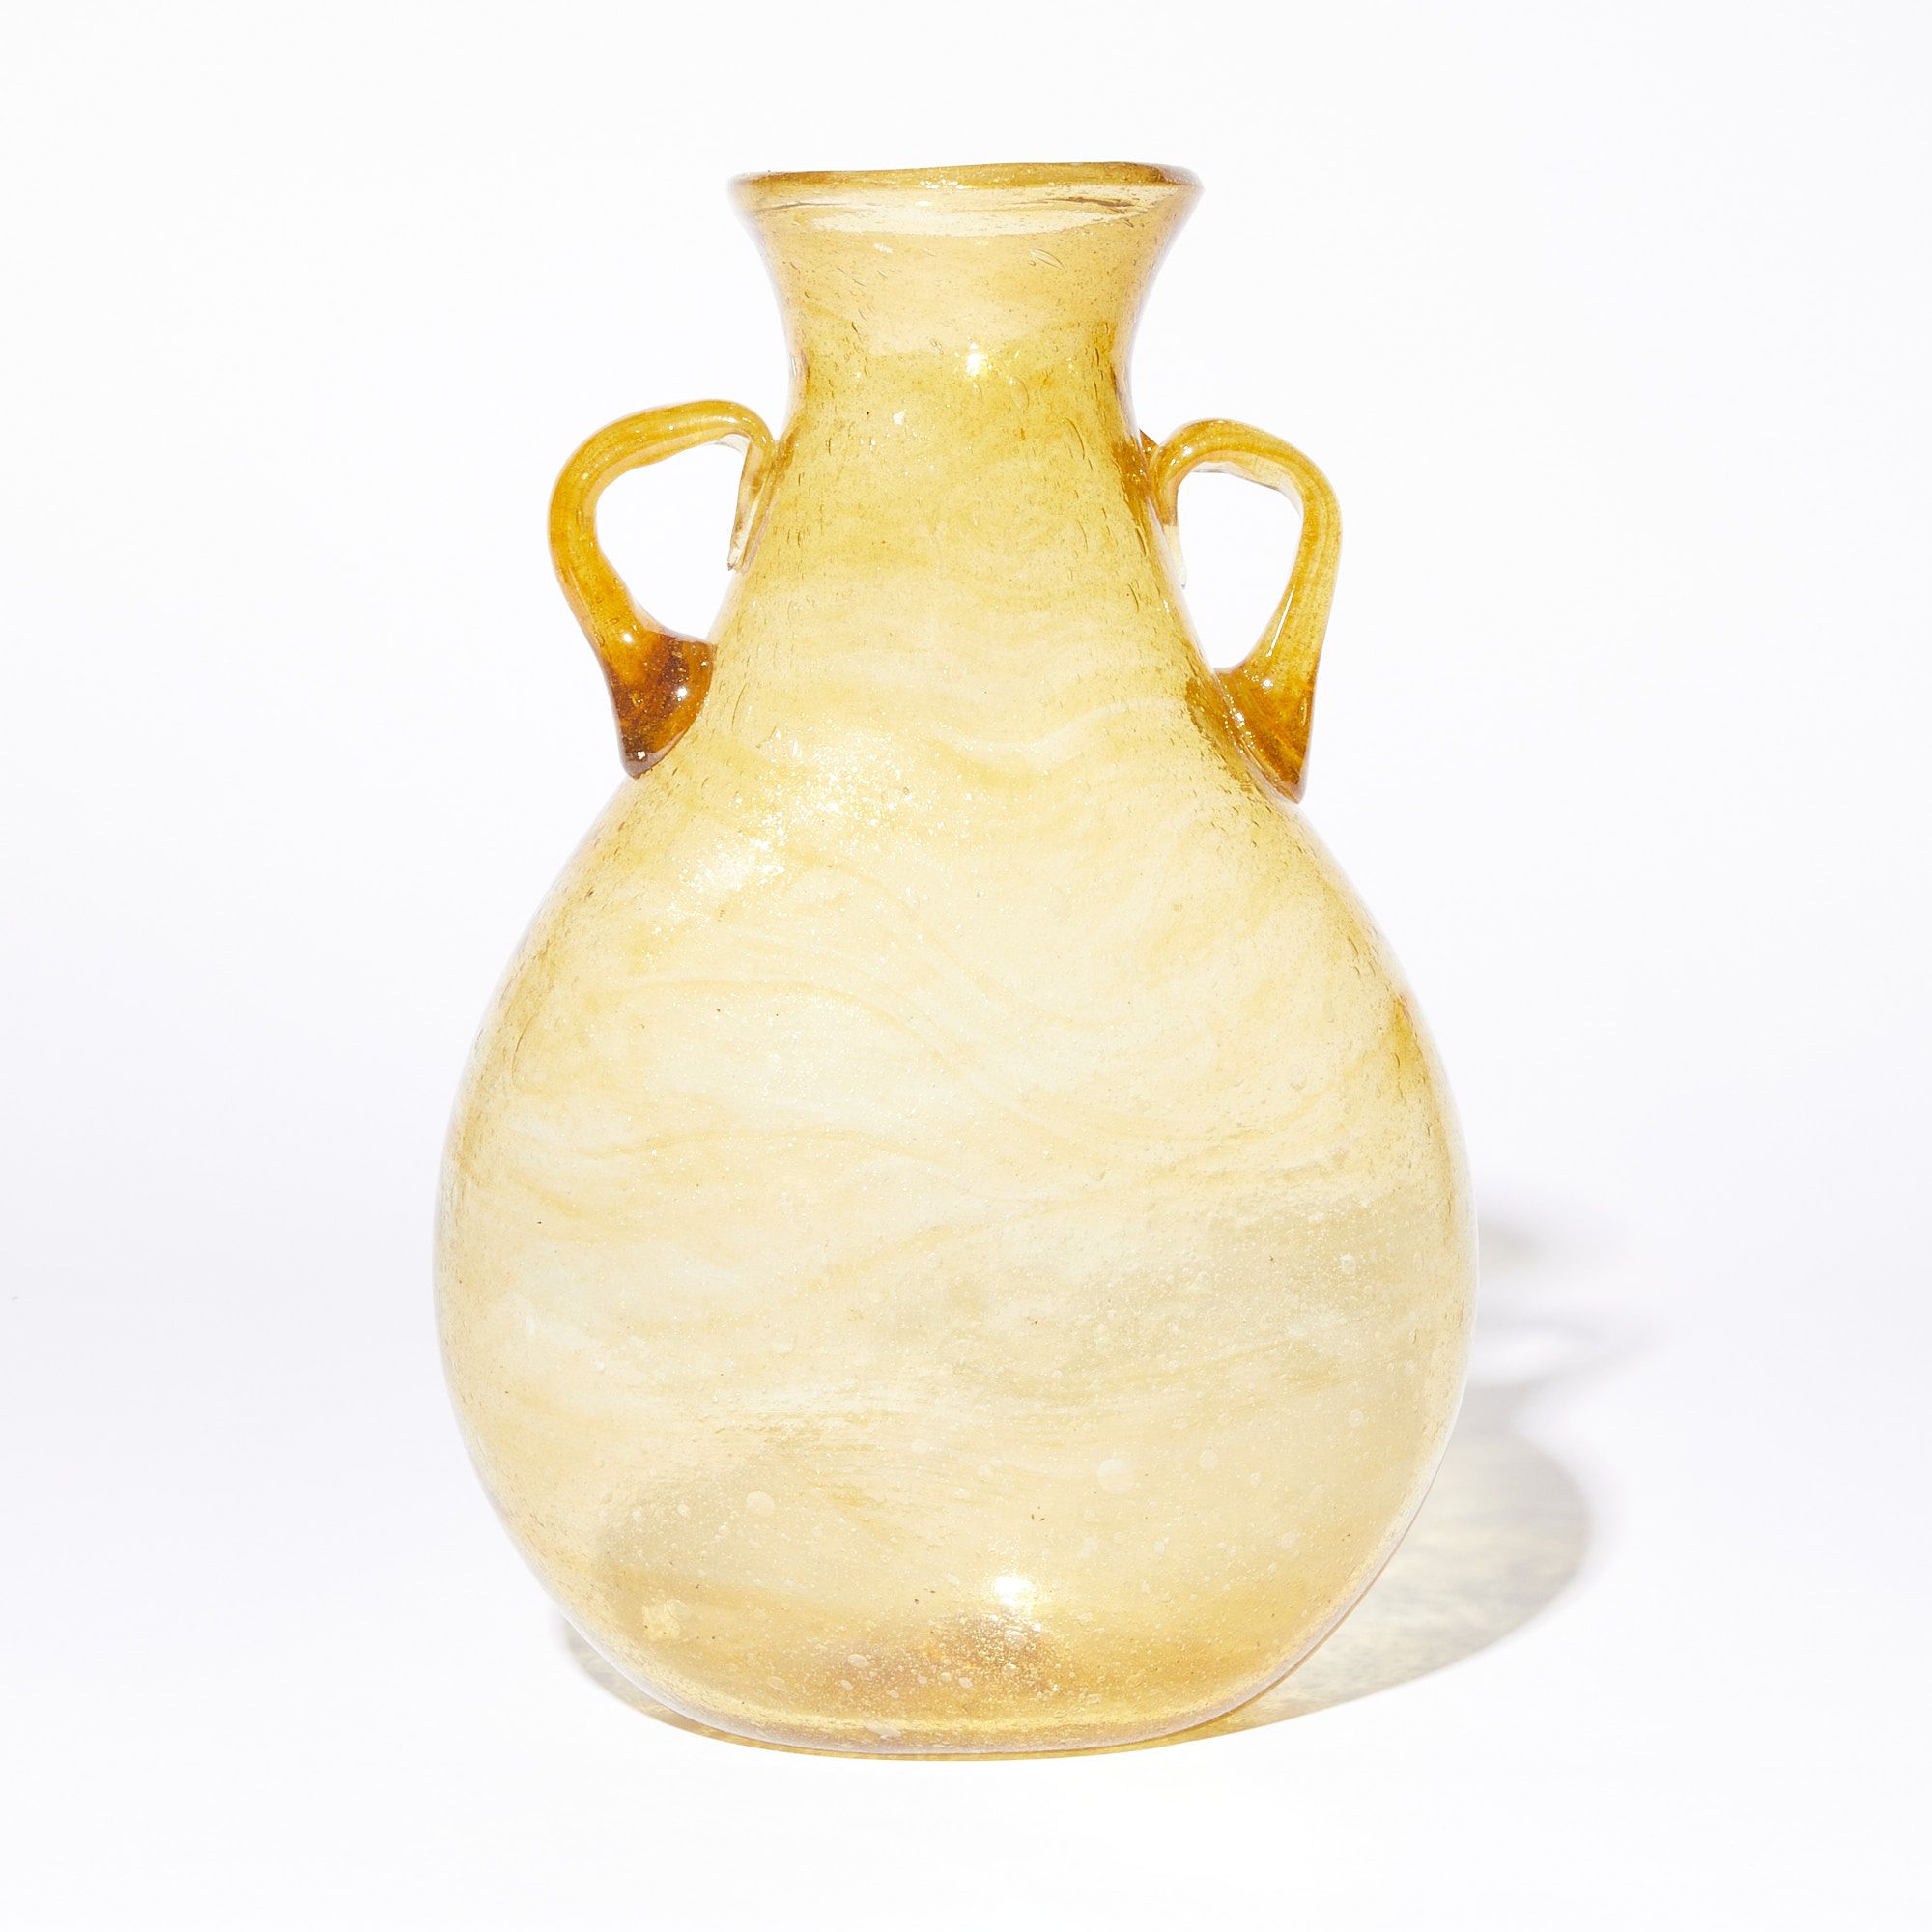 translucent yellow vase, narrowing at the top with two small handles